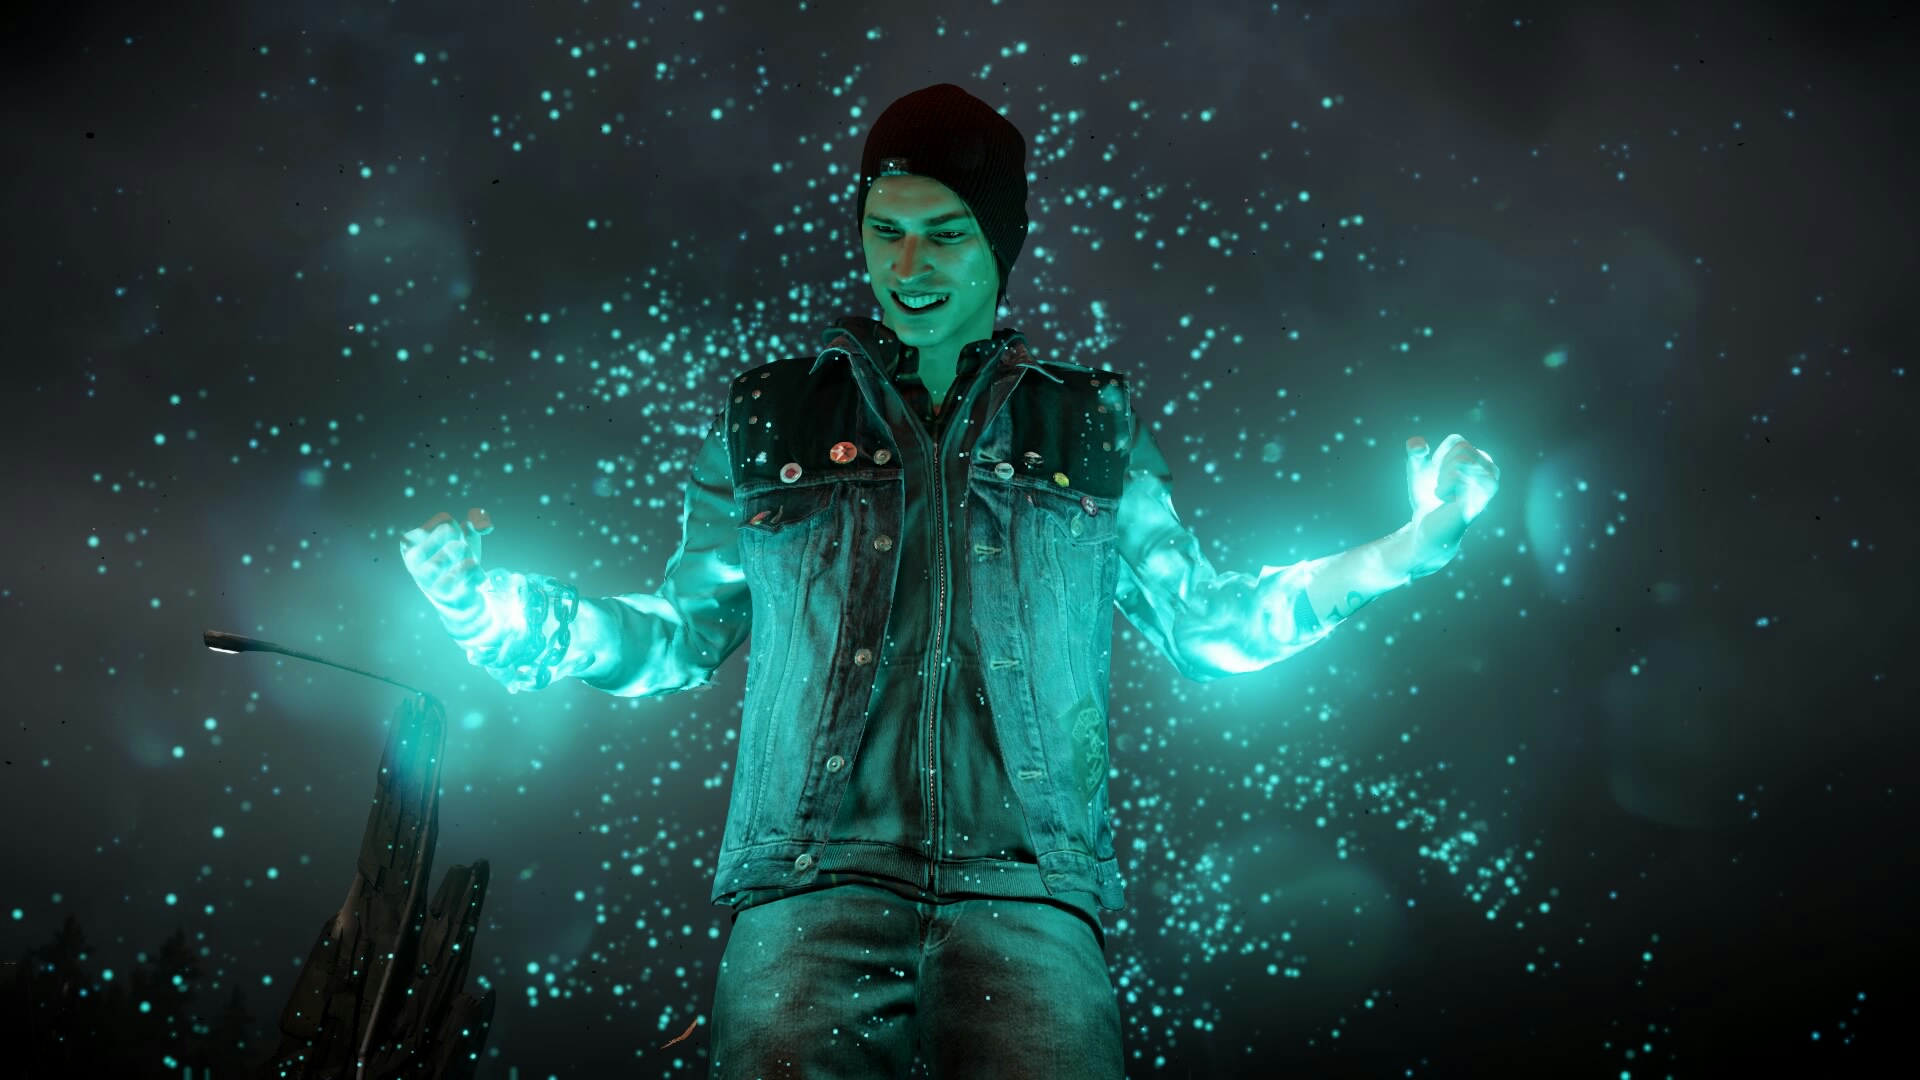 infamous second son wallpaper,green,darkness,digital compositing,space,cg artwork